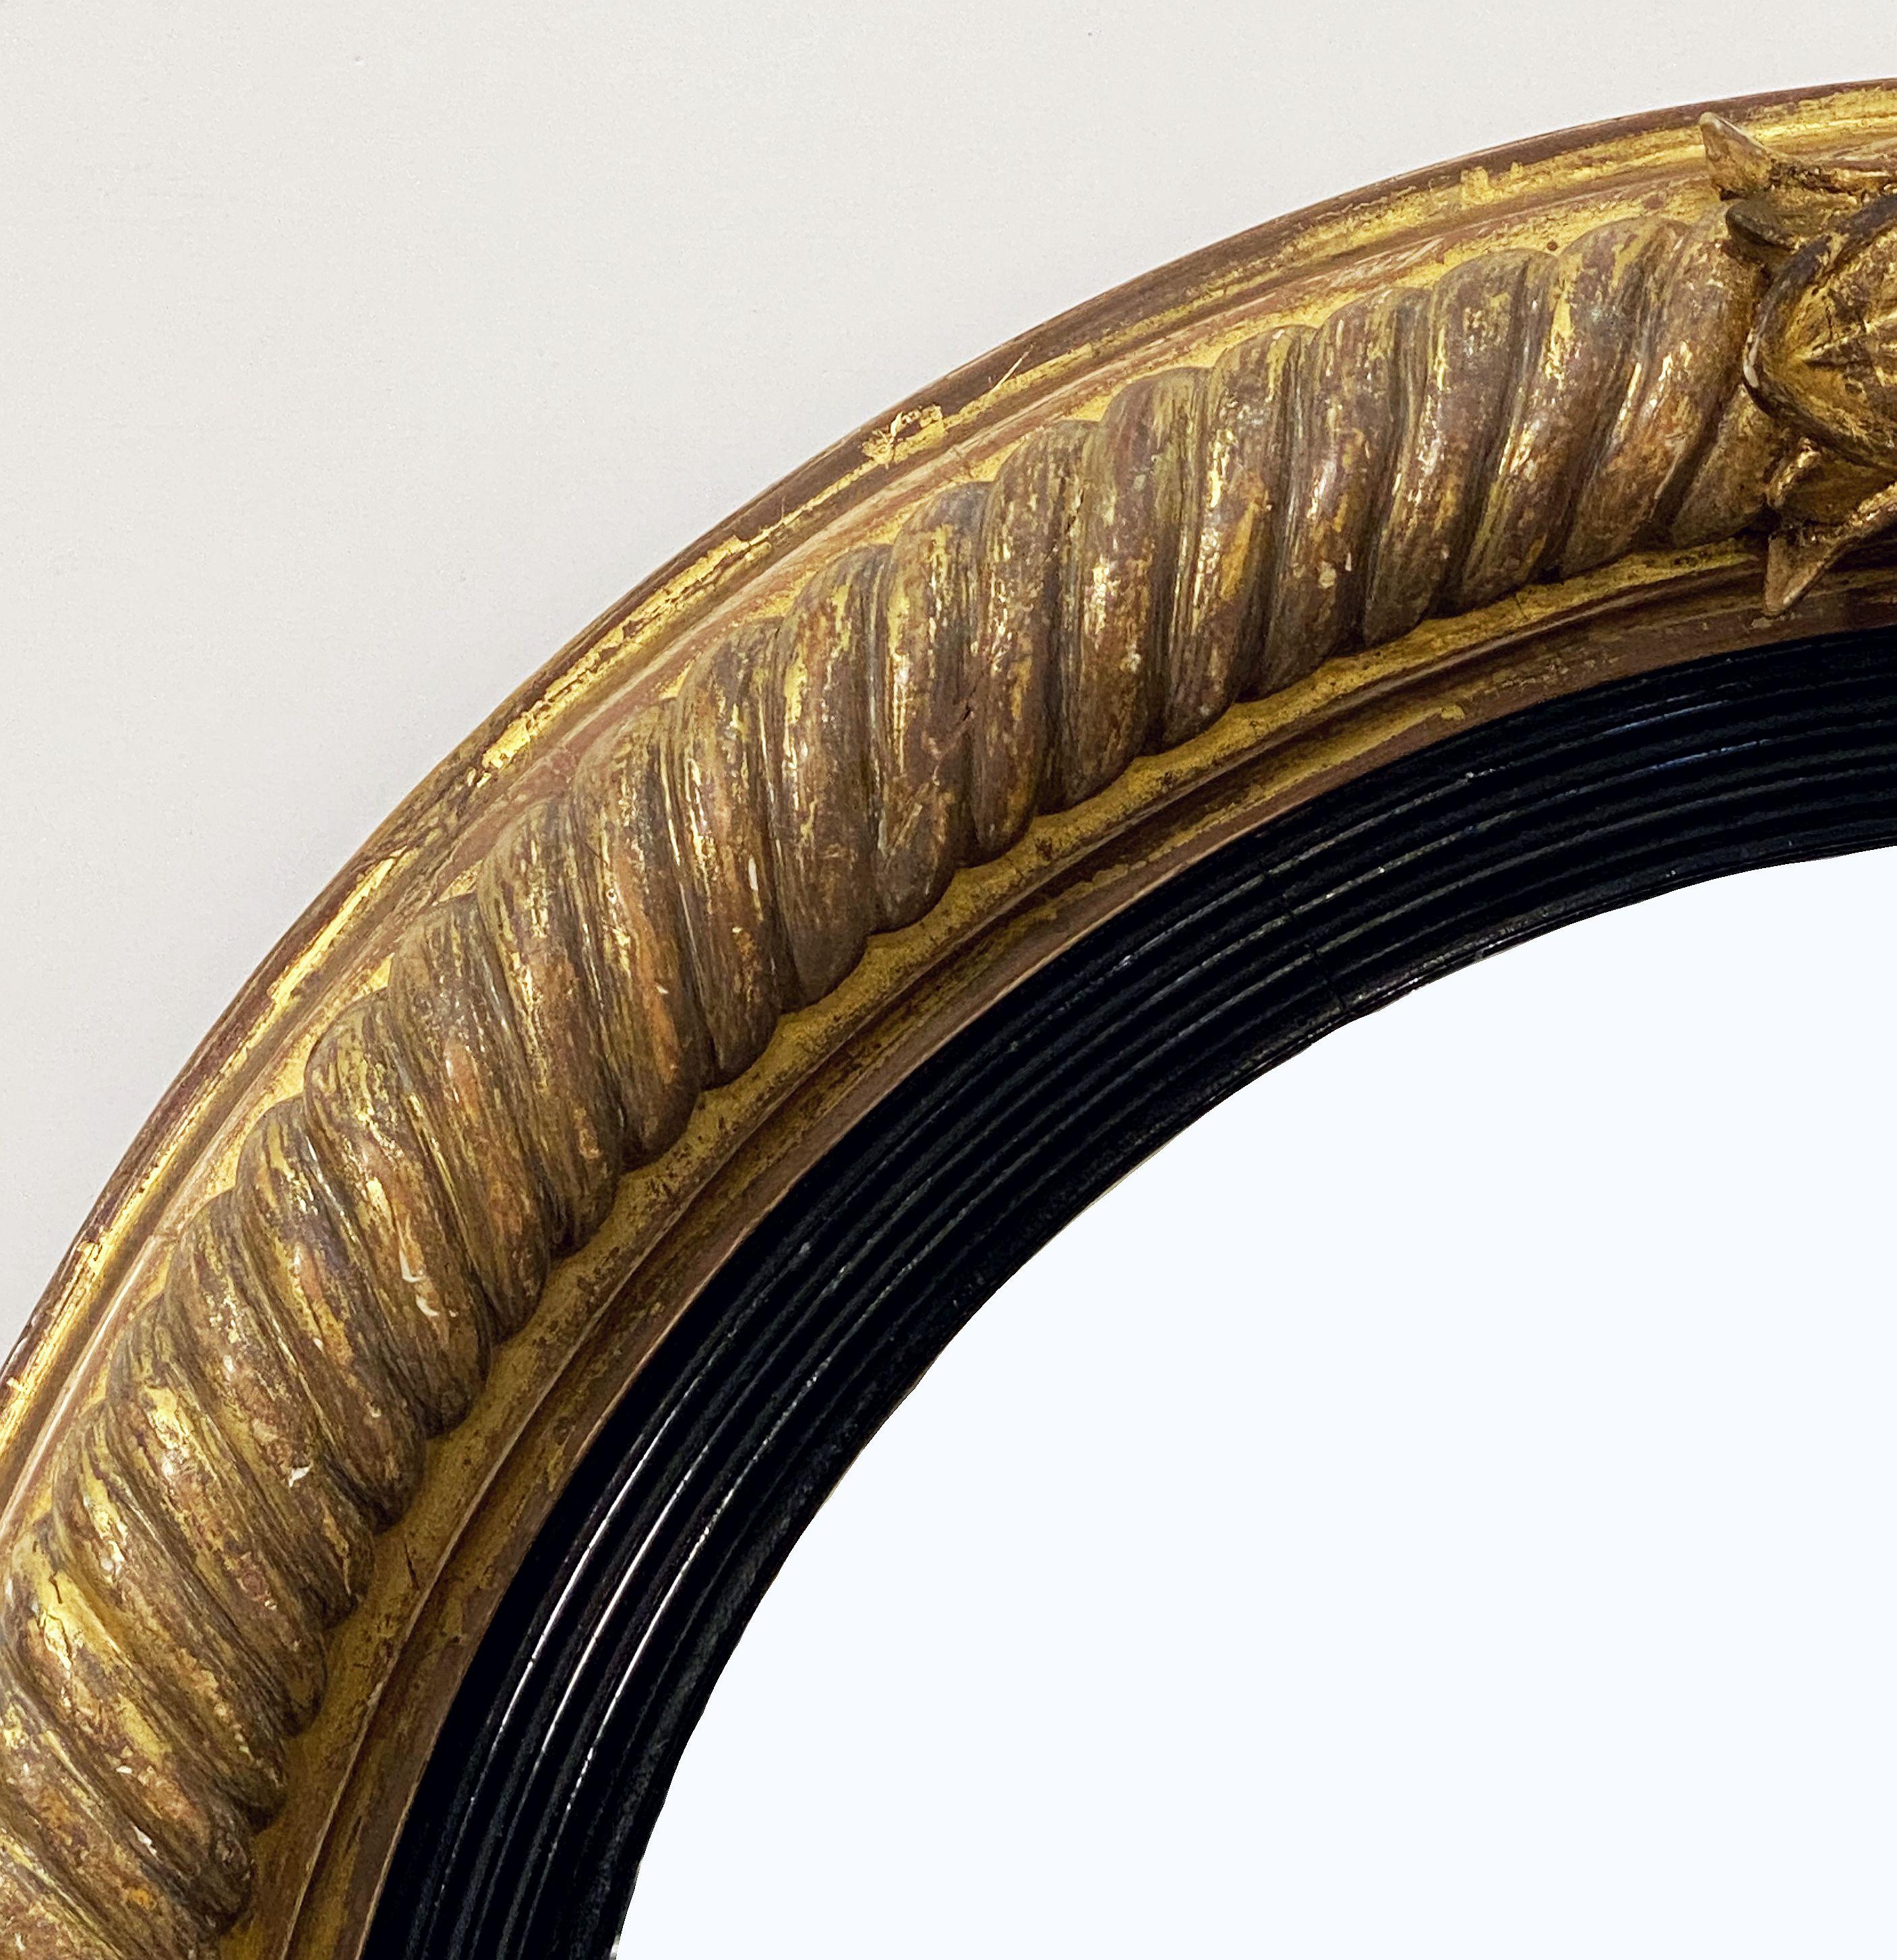 Glass English Gilt and Ebony Convex Mirror from the Regency Era (Diameter 21 1/4) For Sale